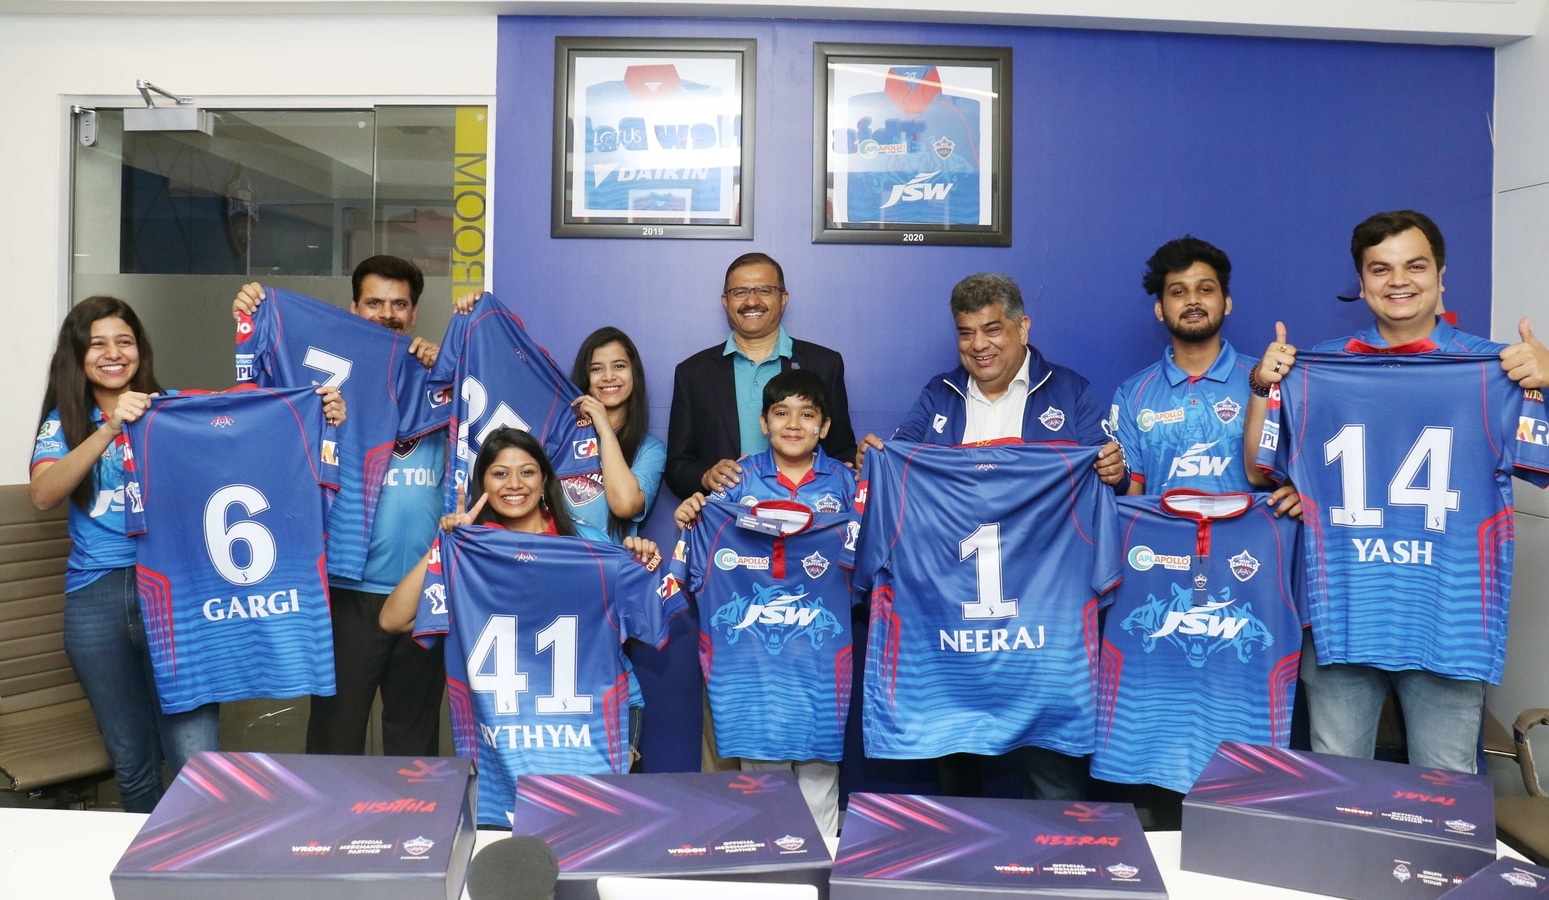 IPL 2021: Delhi Capitals launch new jersey for upcoming 14th edition